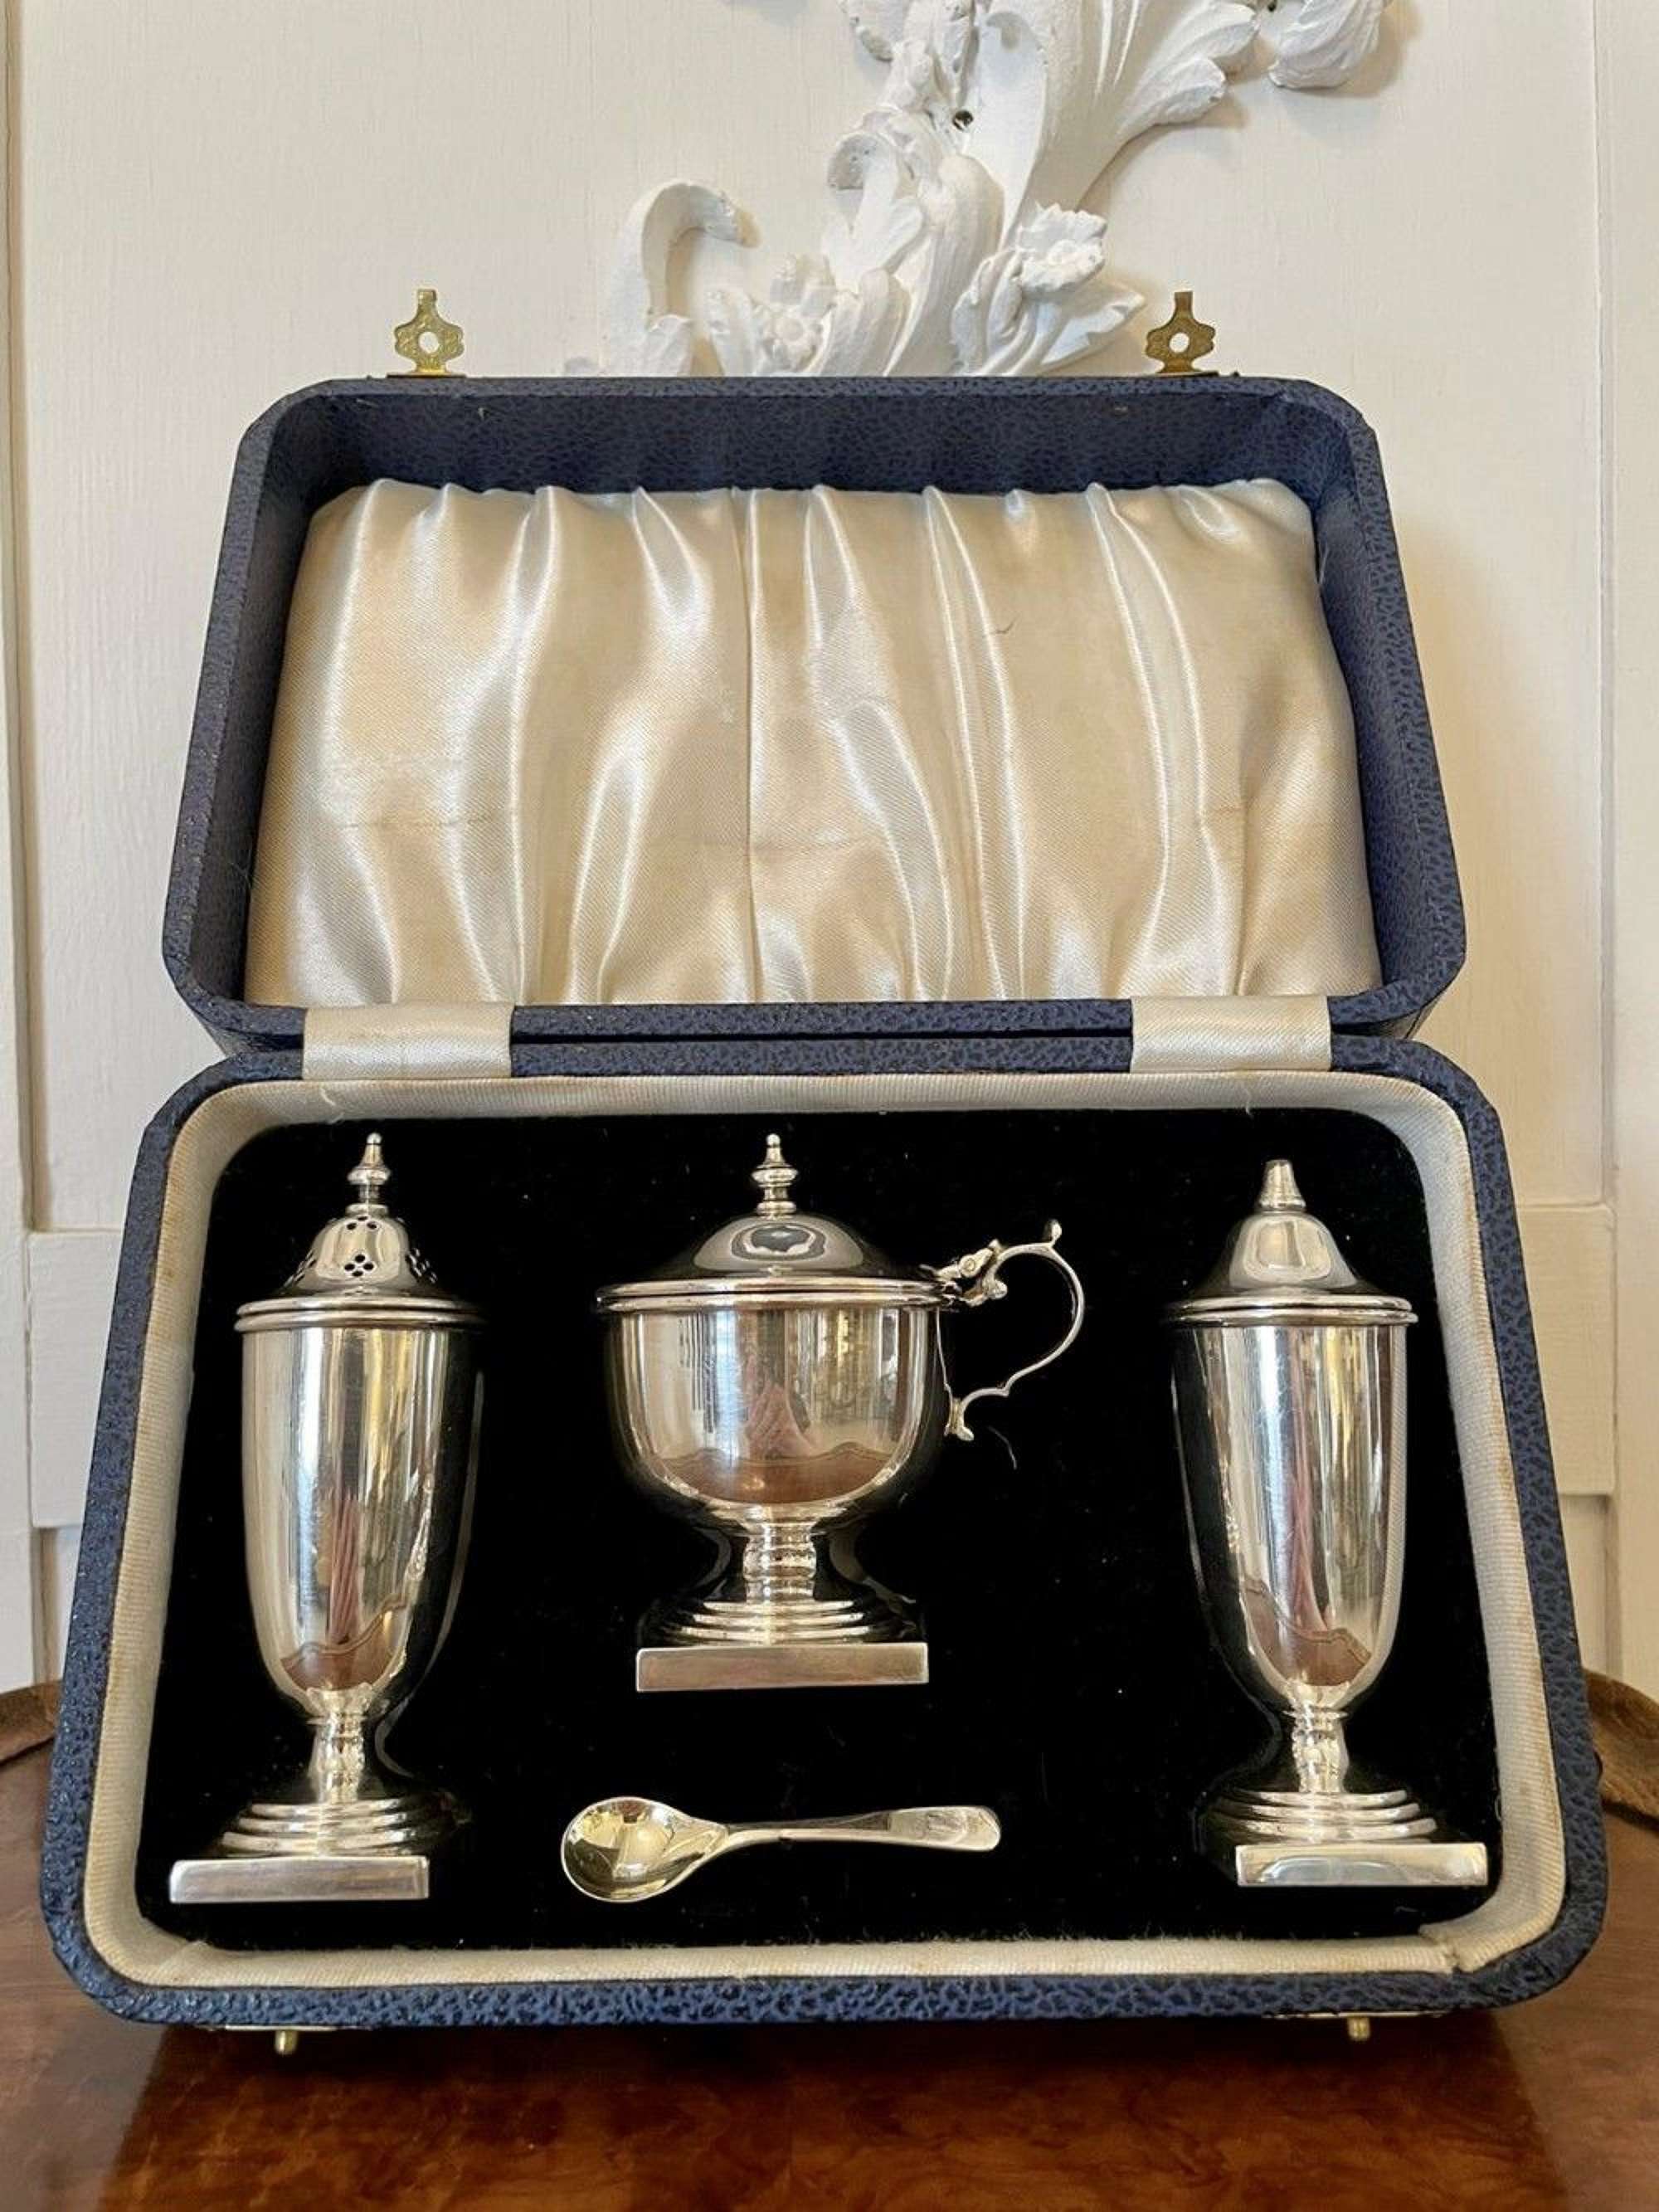 George V Cased Four Piece Solid Sterling Silver Condiment Set By Viners, Sheffield